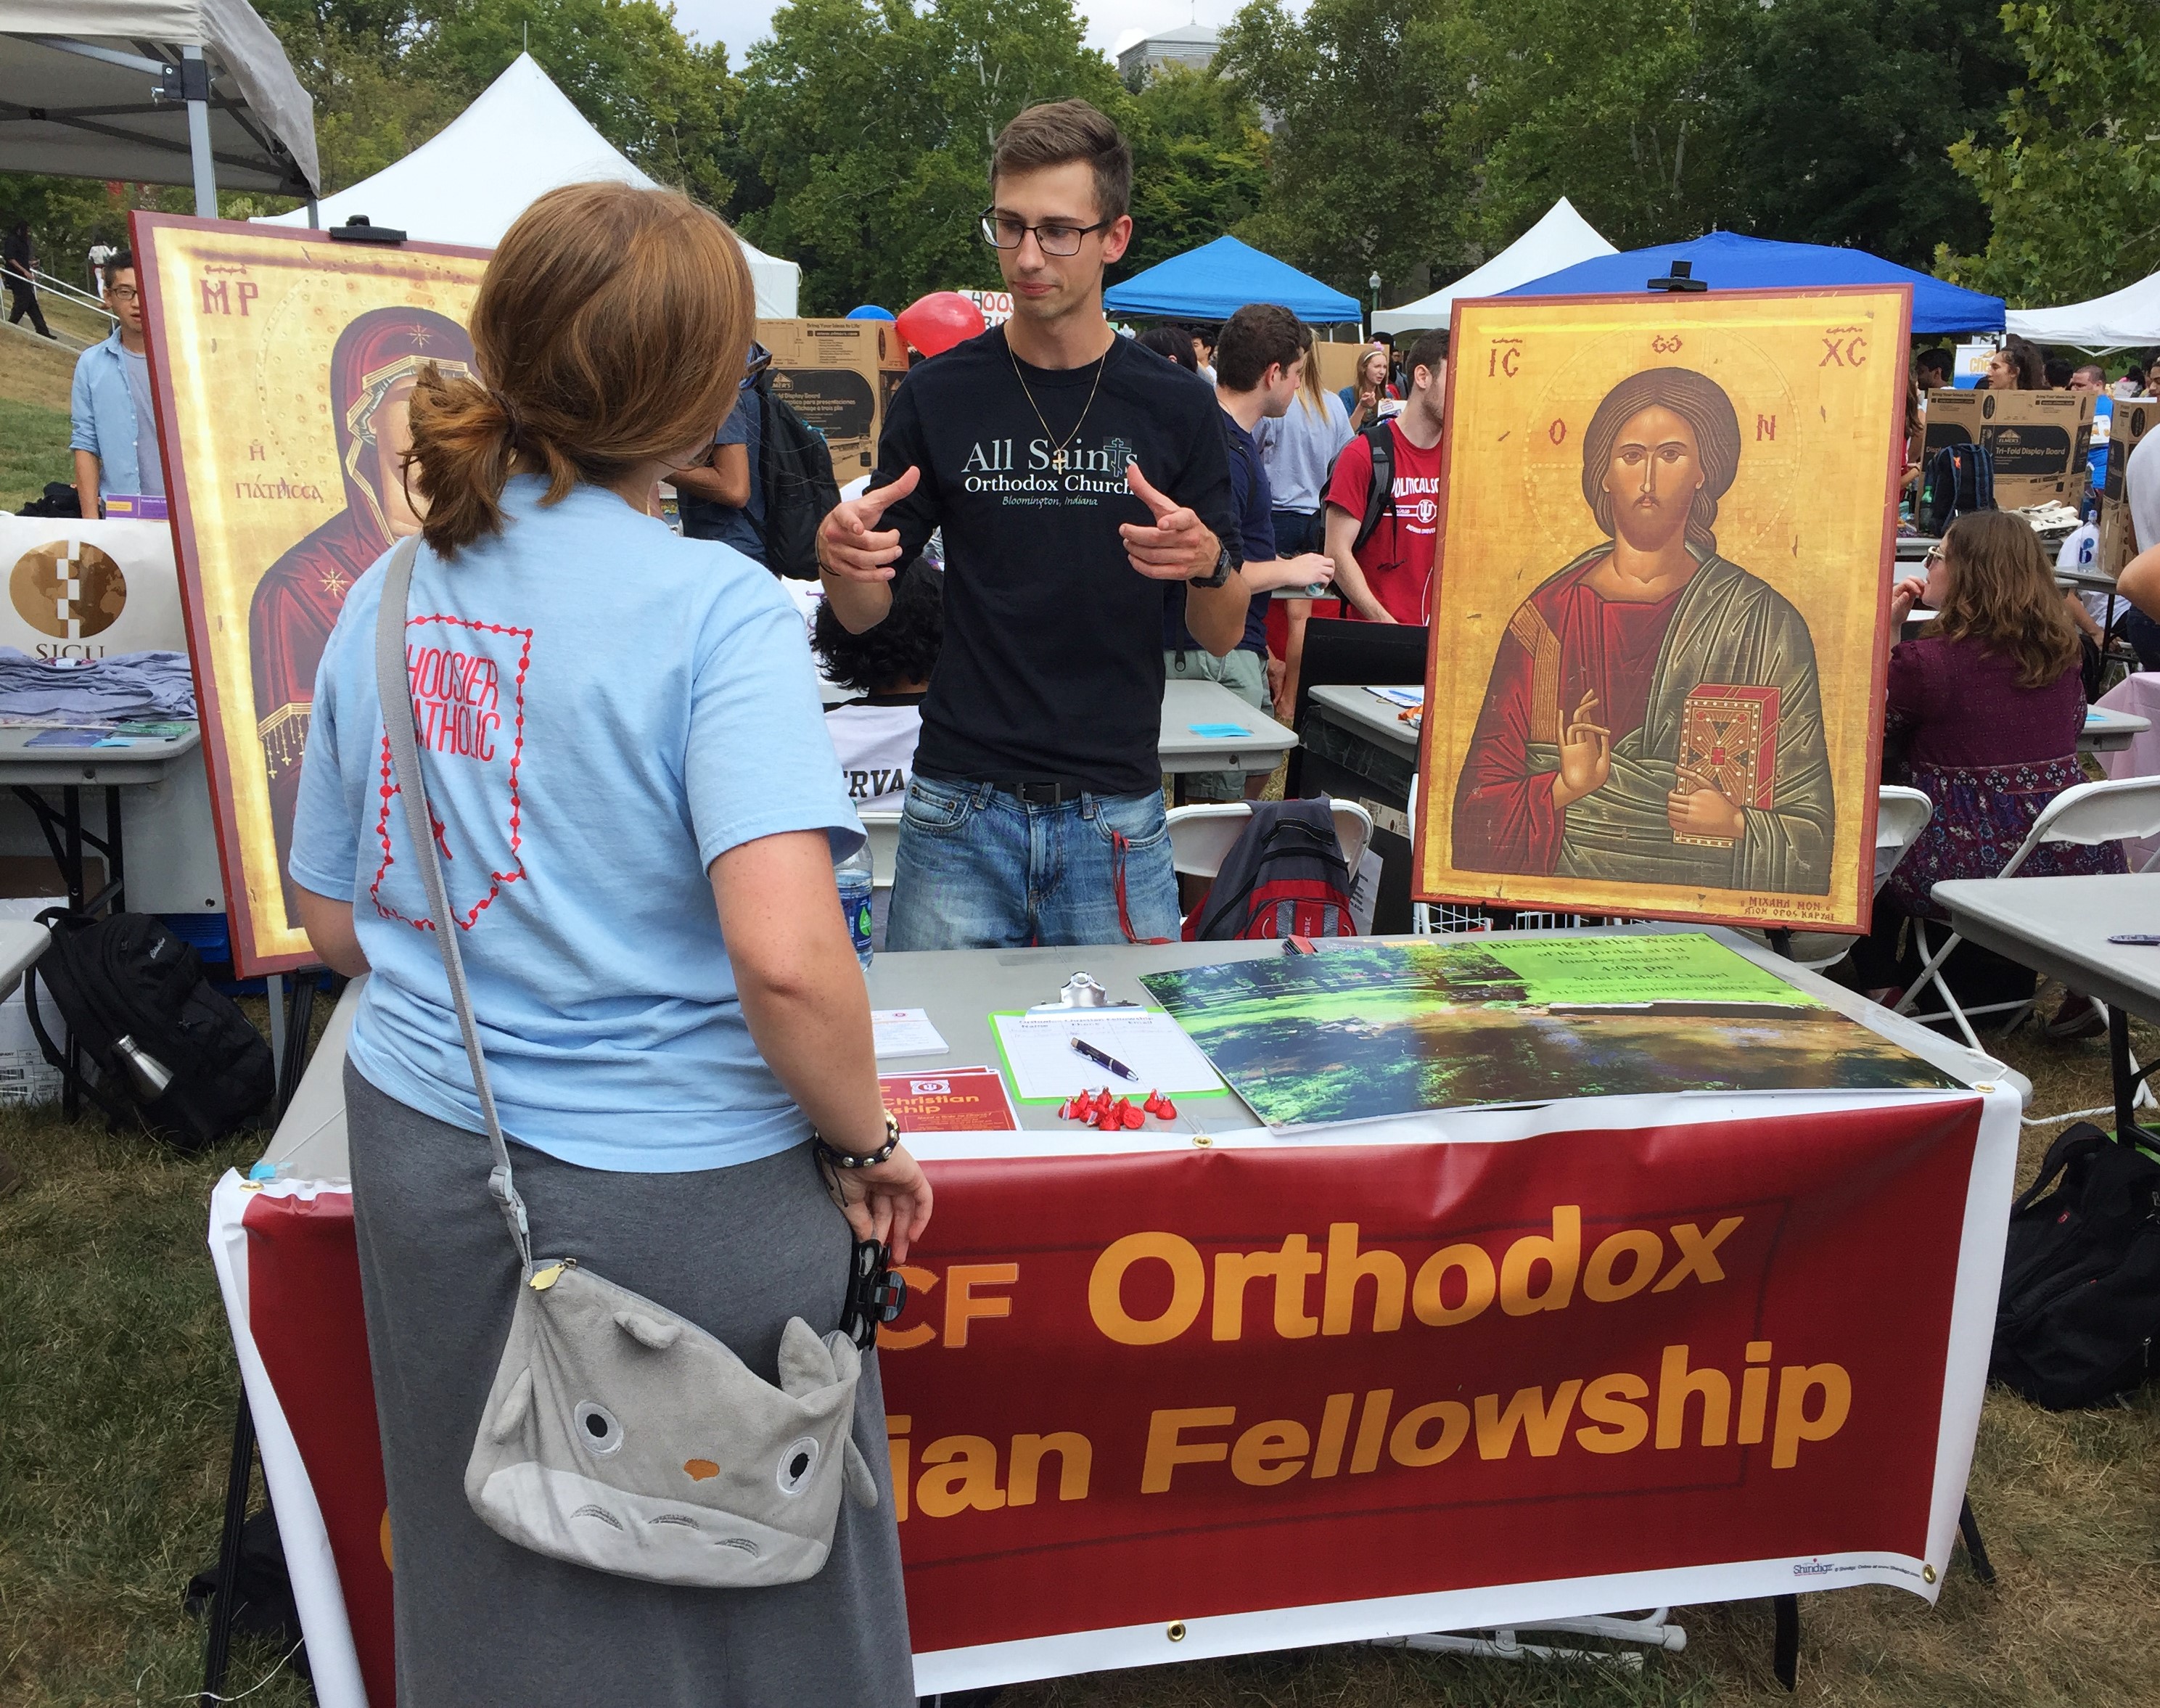 Jacob introduces OCF at the Student Involvement Fair